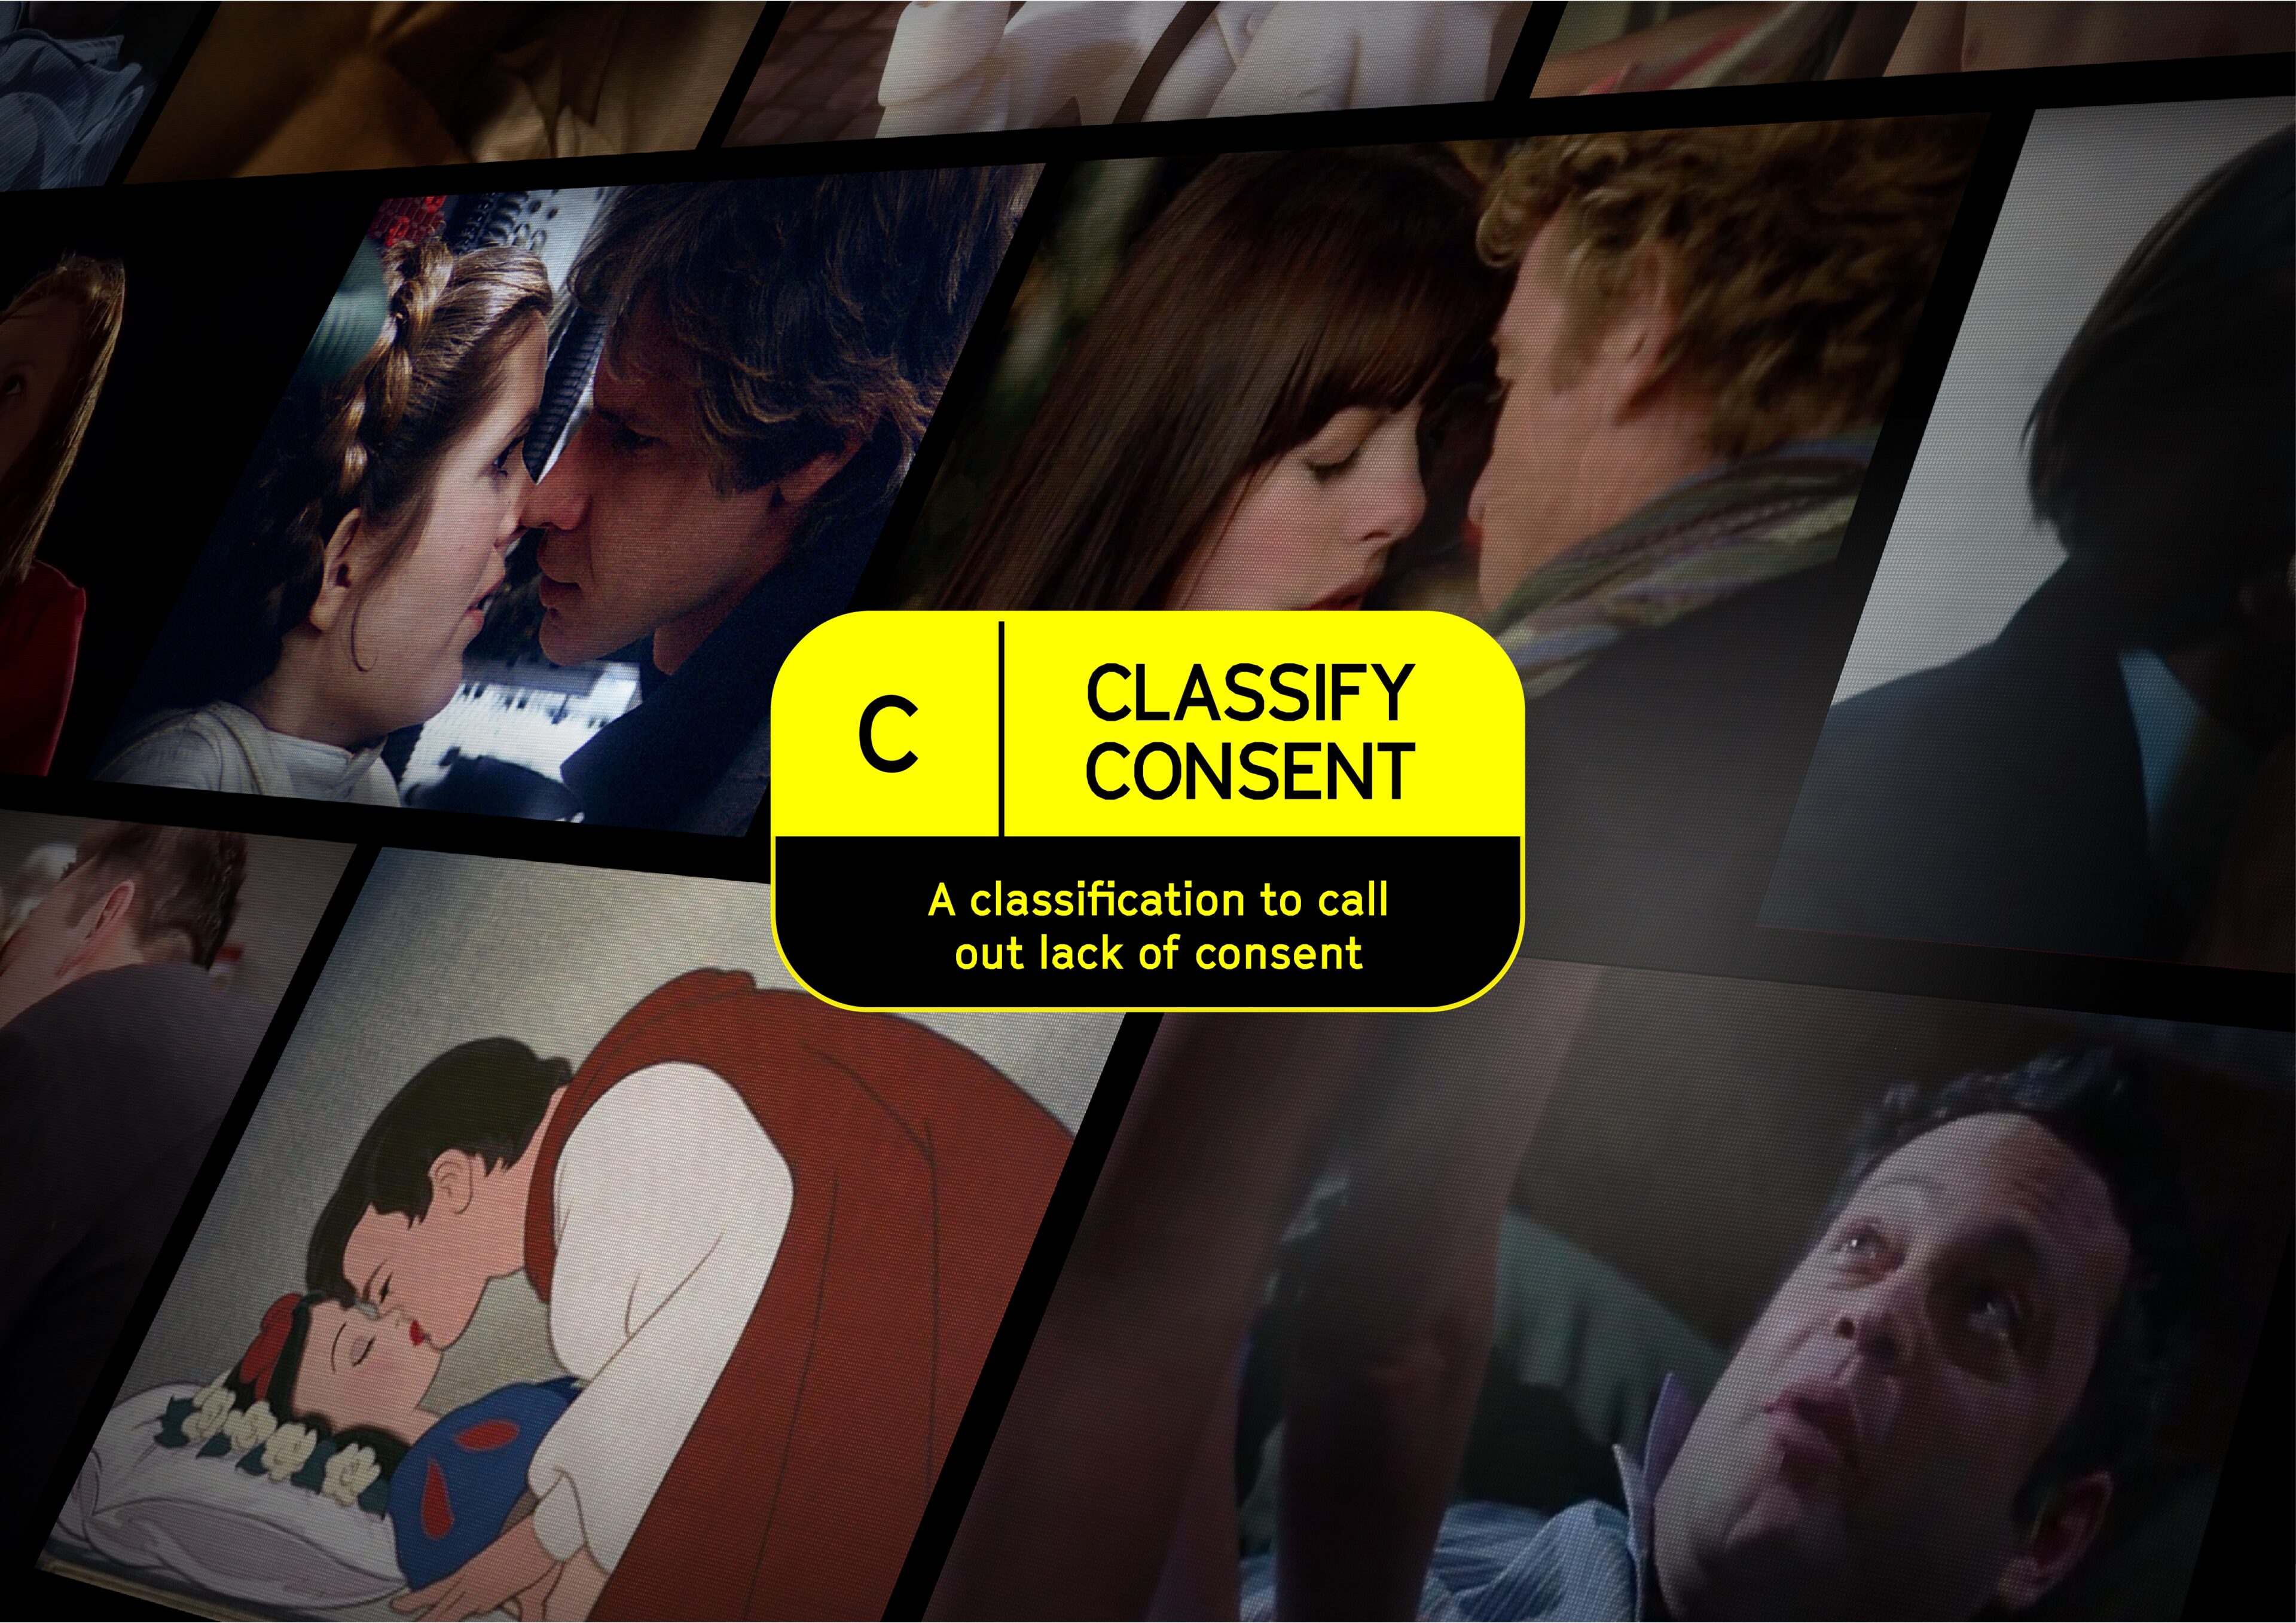 Images taken from movies and TV shows that showcase times where consent was not given